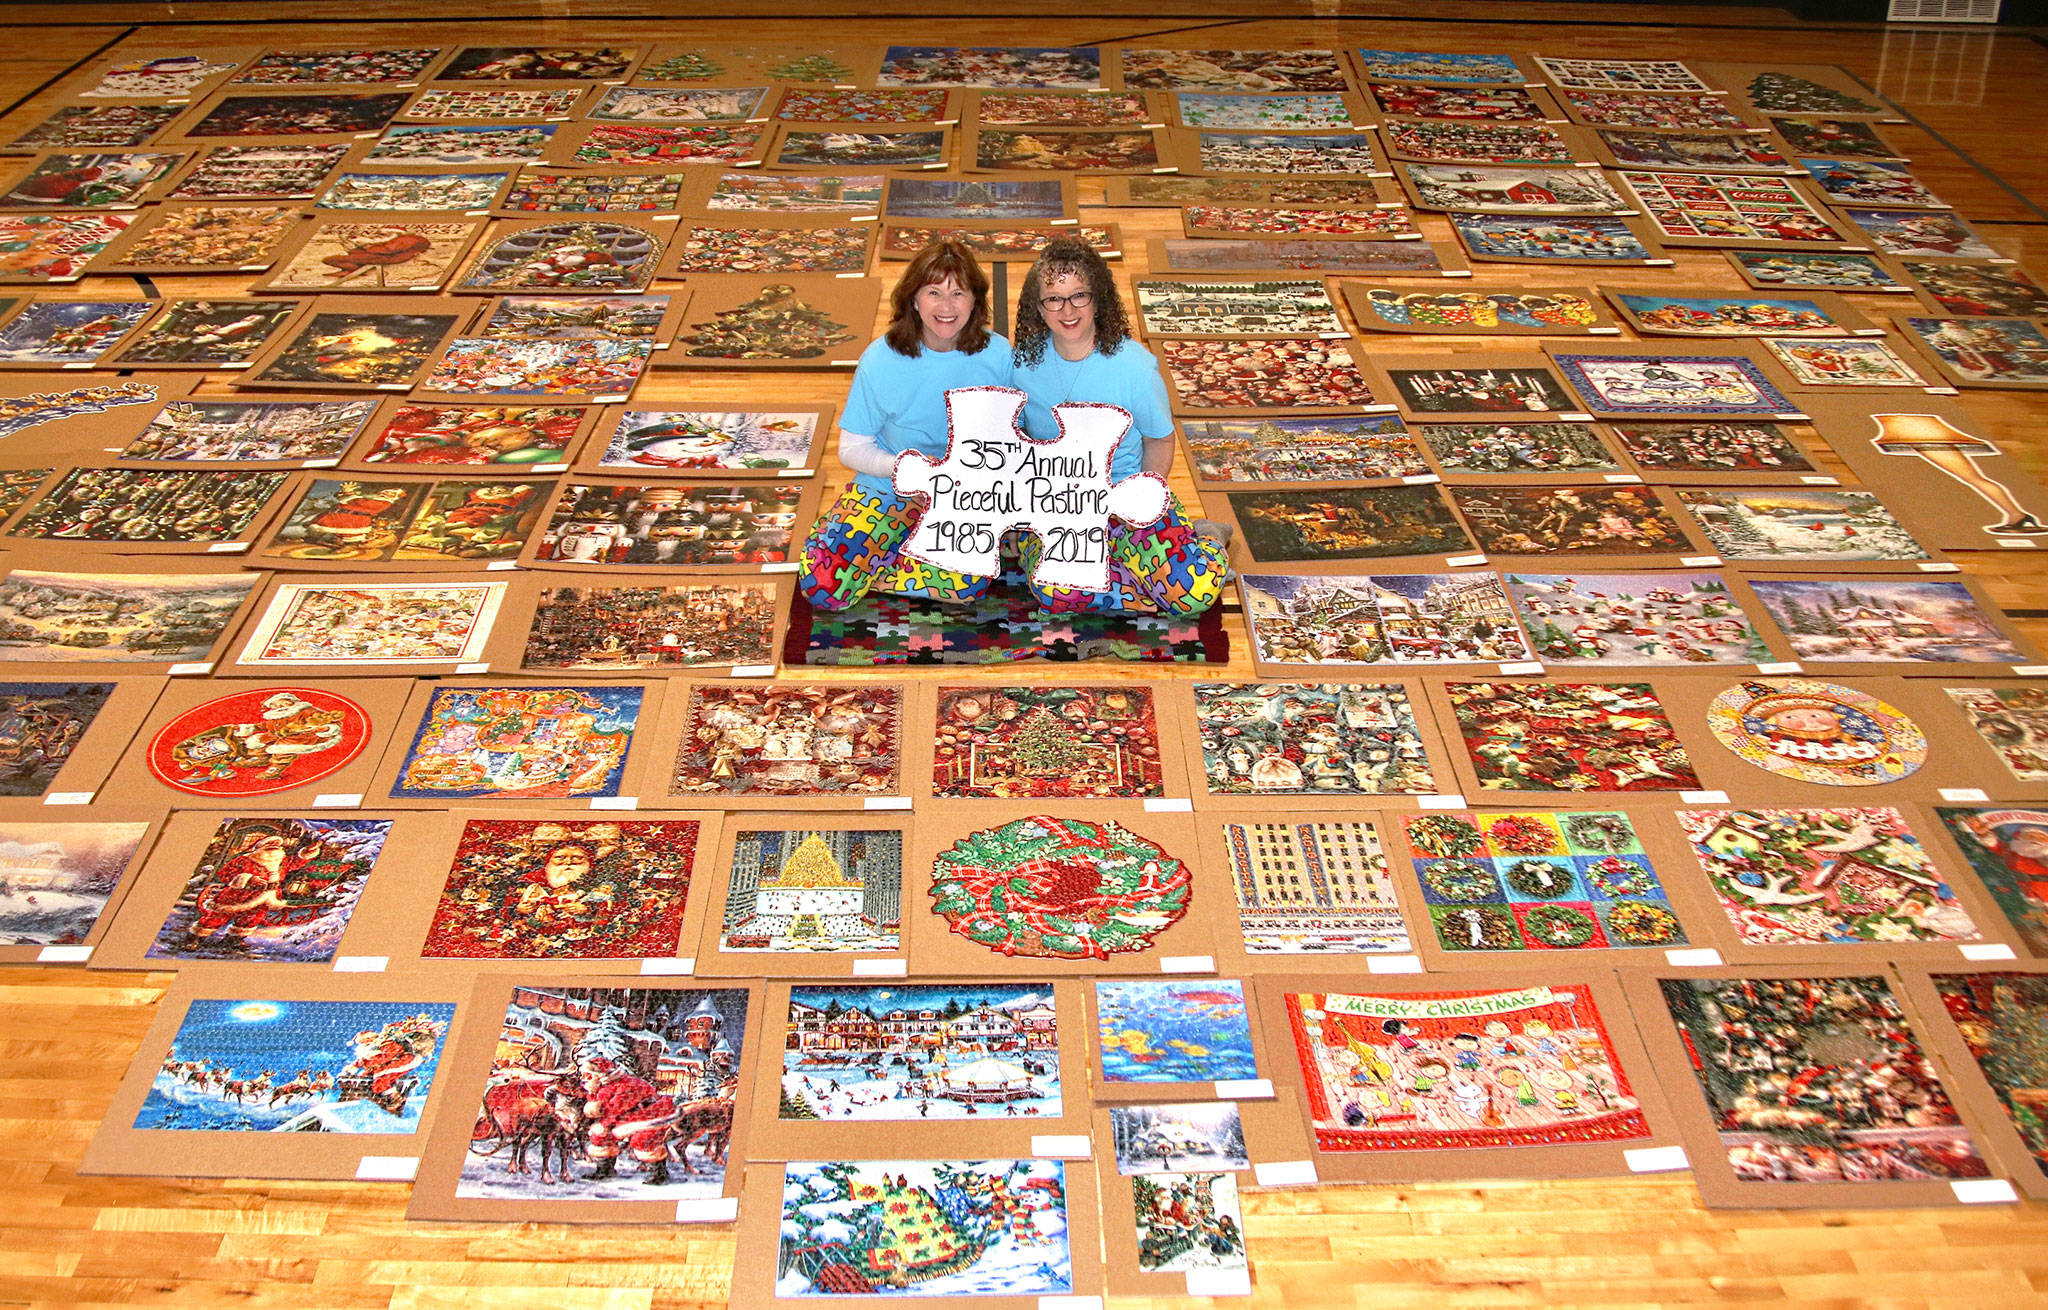 Same time, next Christmas: Jigsaw puzzles turn into pieceful pastime for college chums